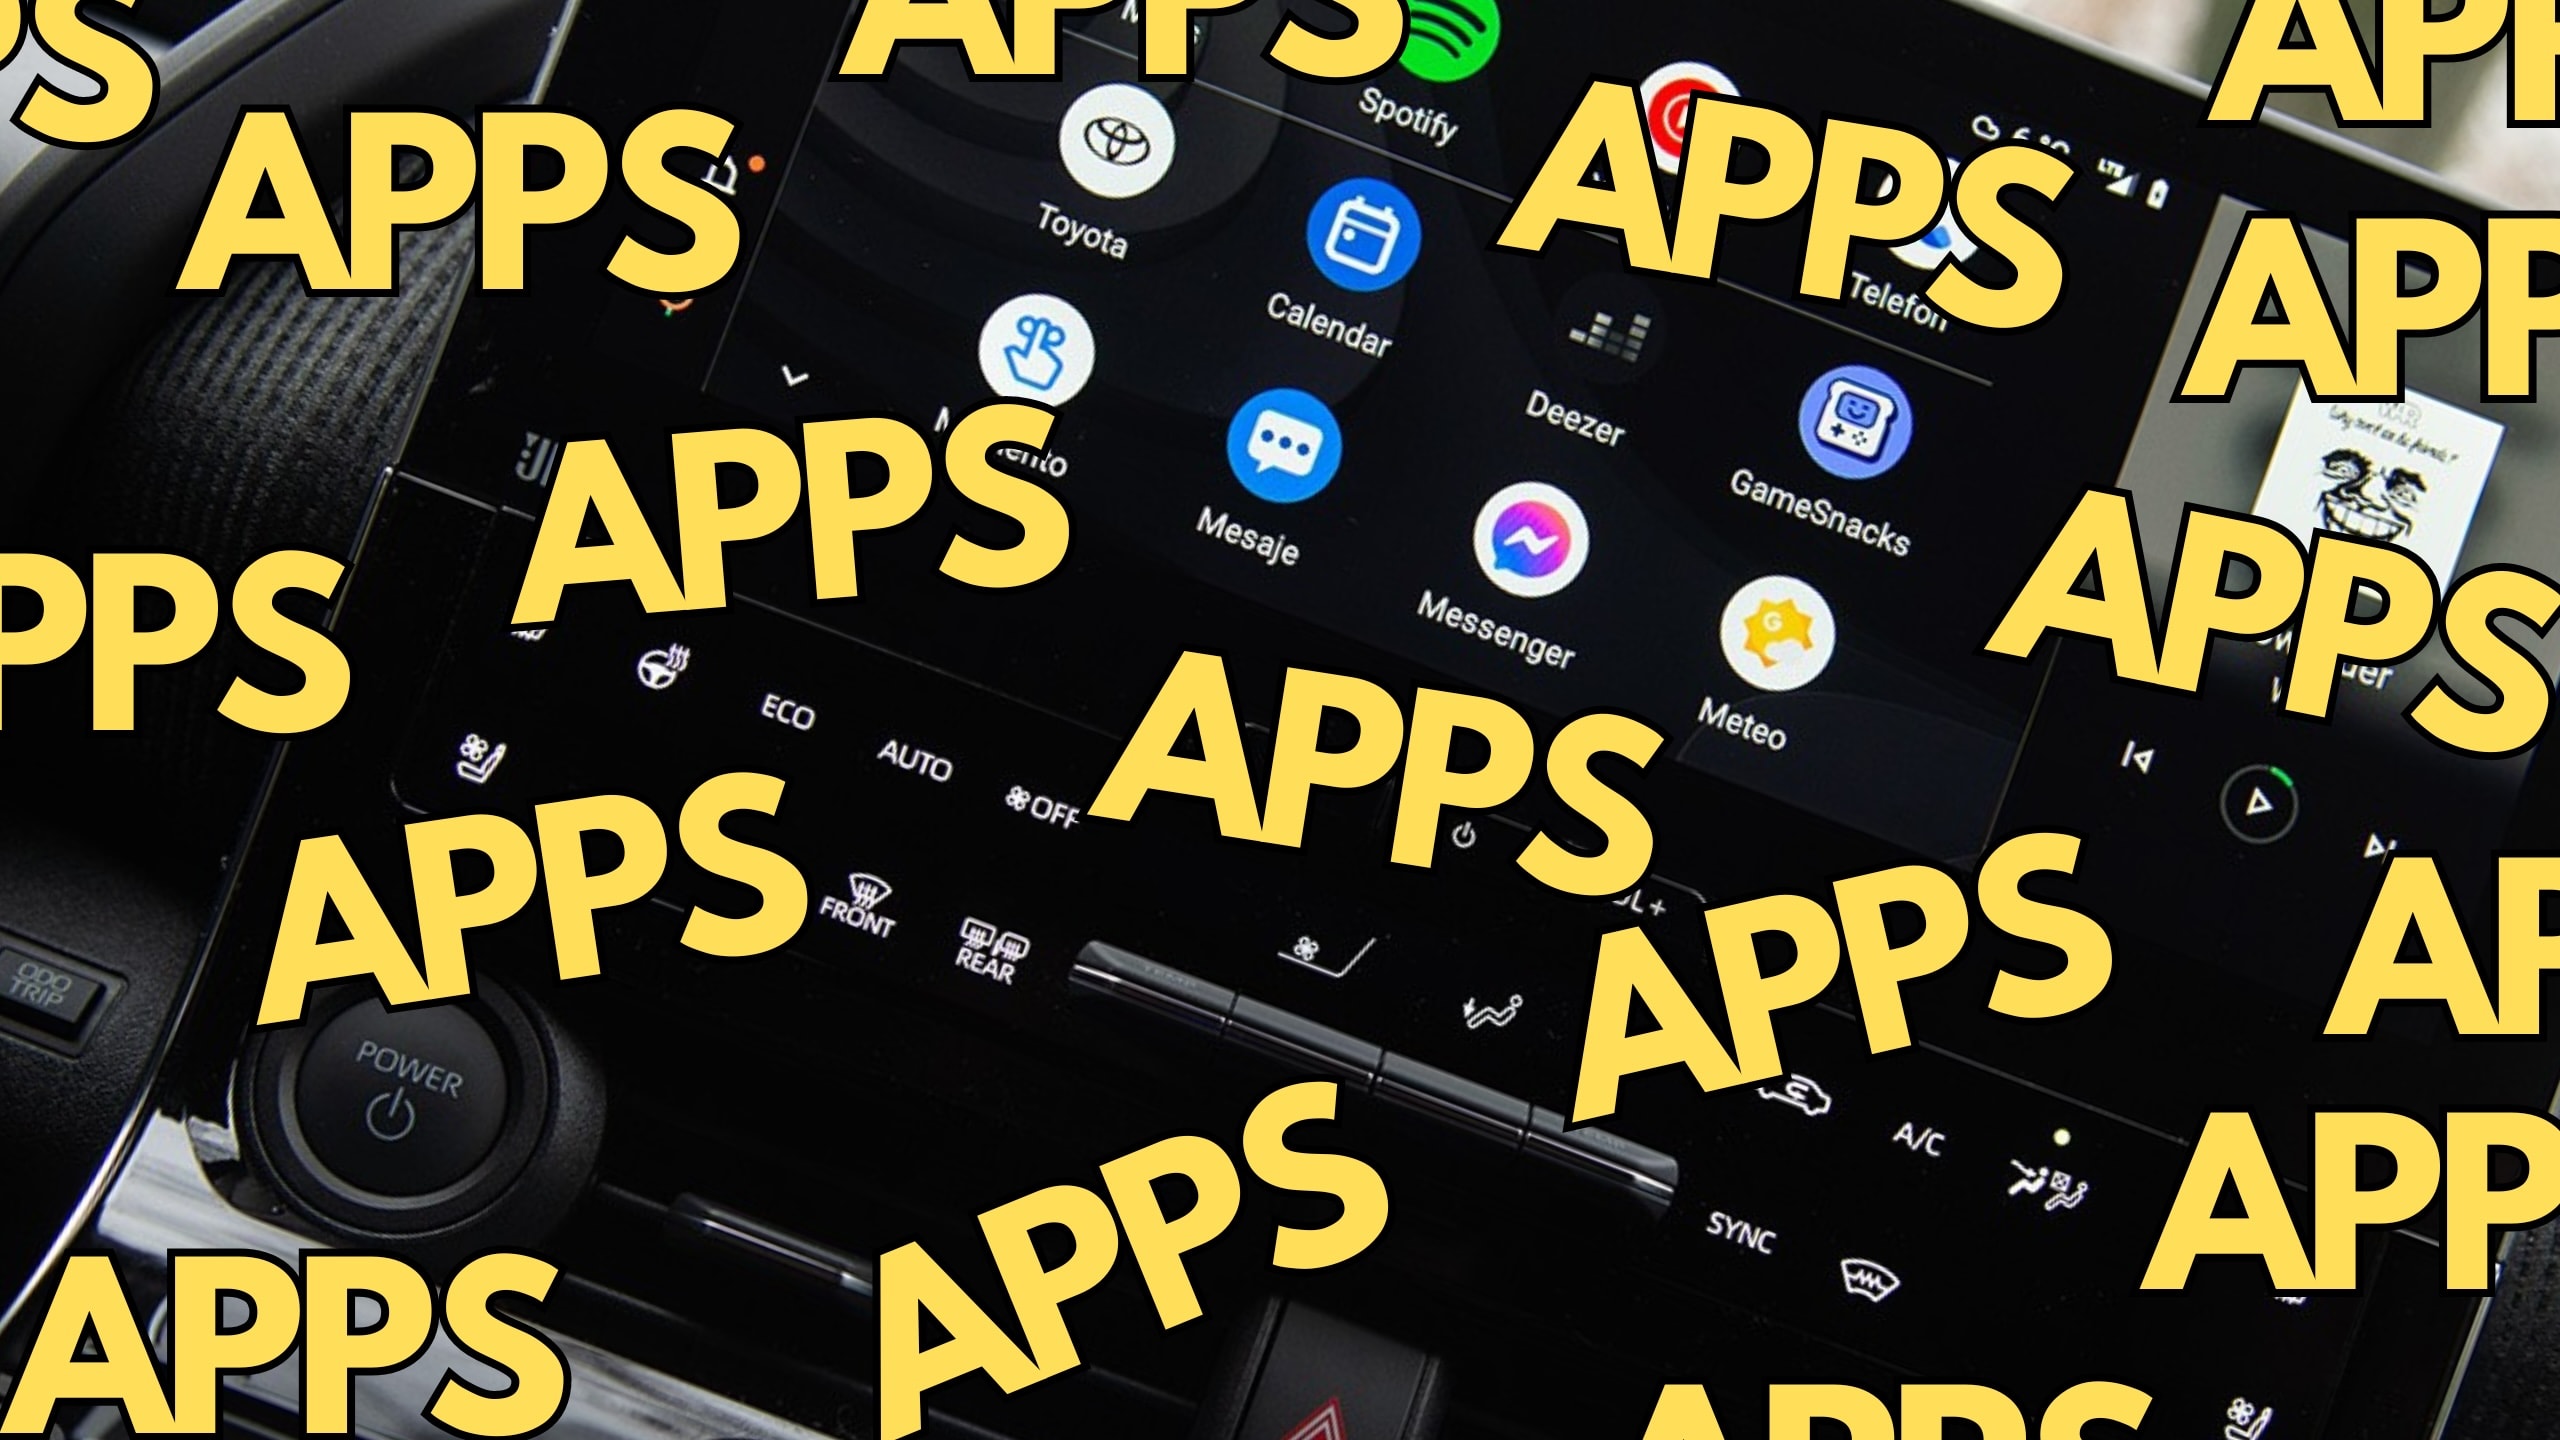 Android Auto just got more apps: How Google's Genius project is making CarPlay look outdated